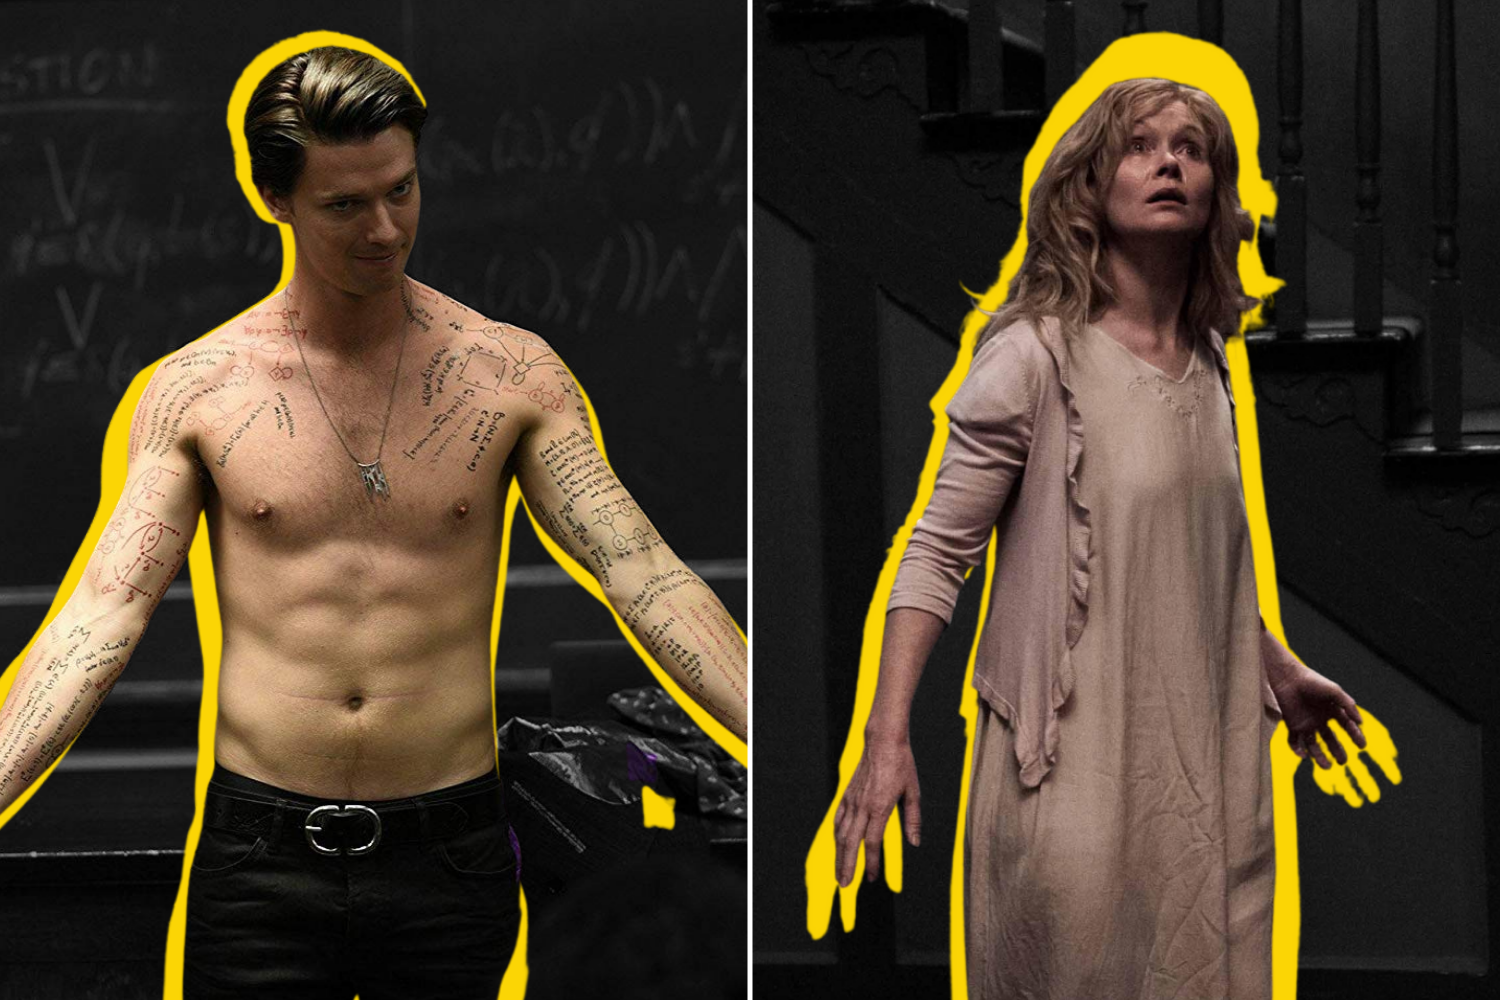 The Monstrous Minds of ‘Daniel Isn’t Real’ and ‘The Babadook’